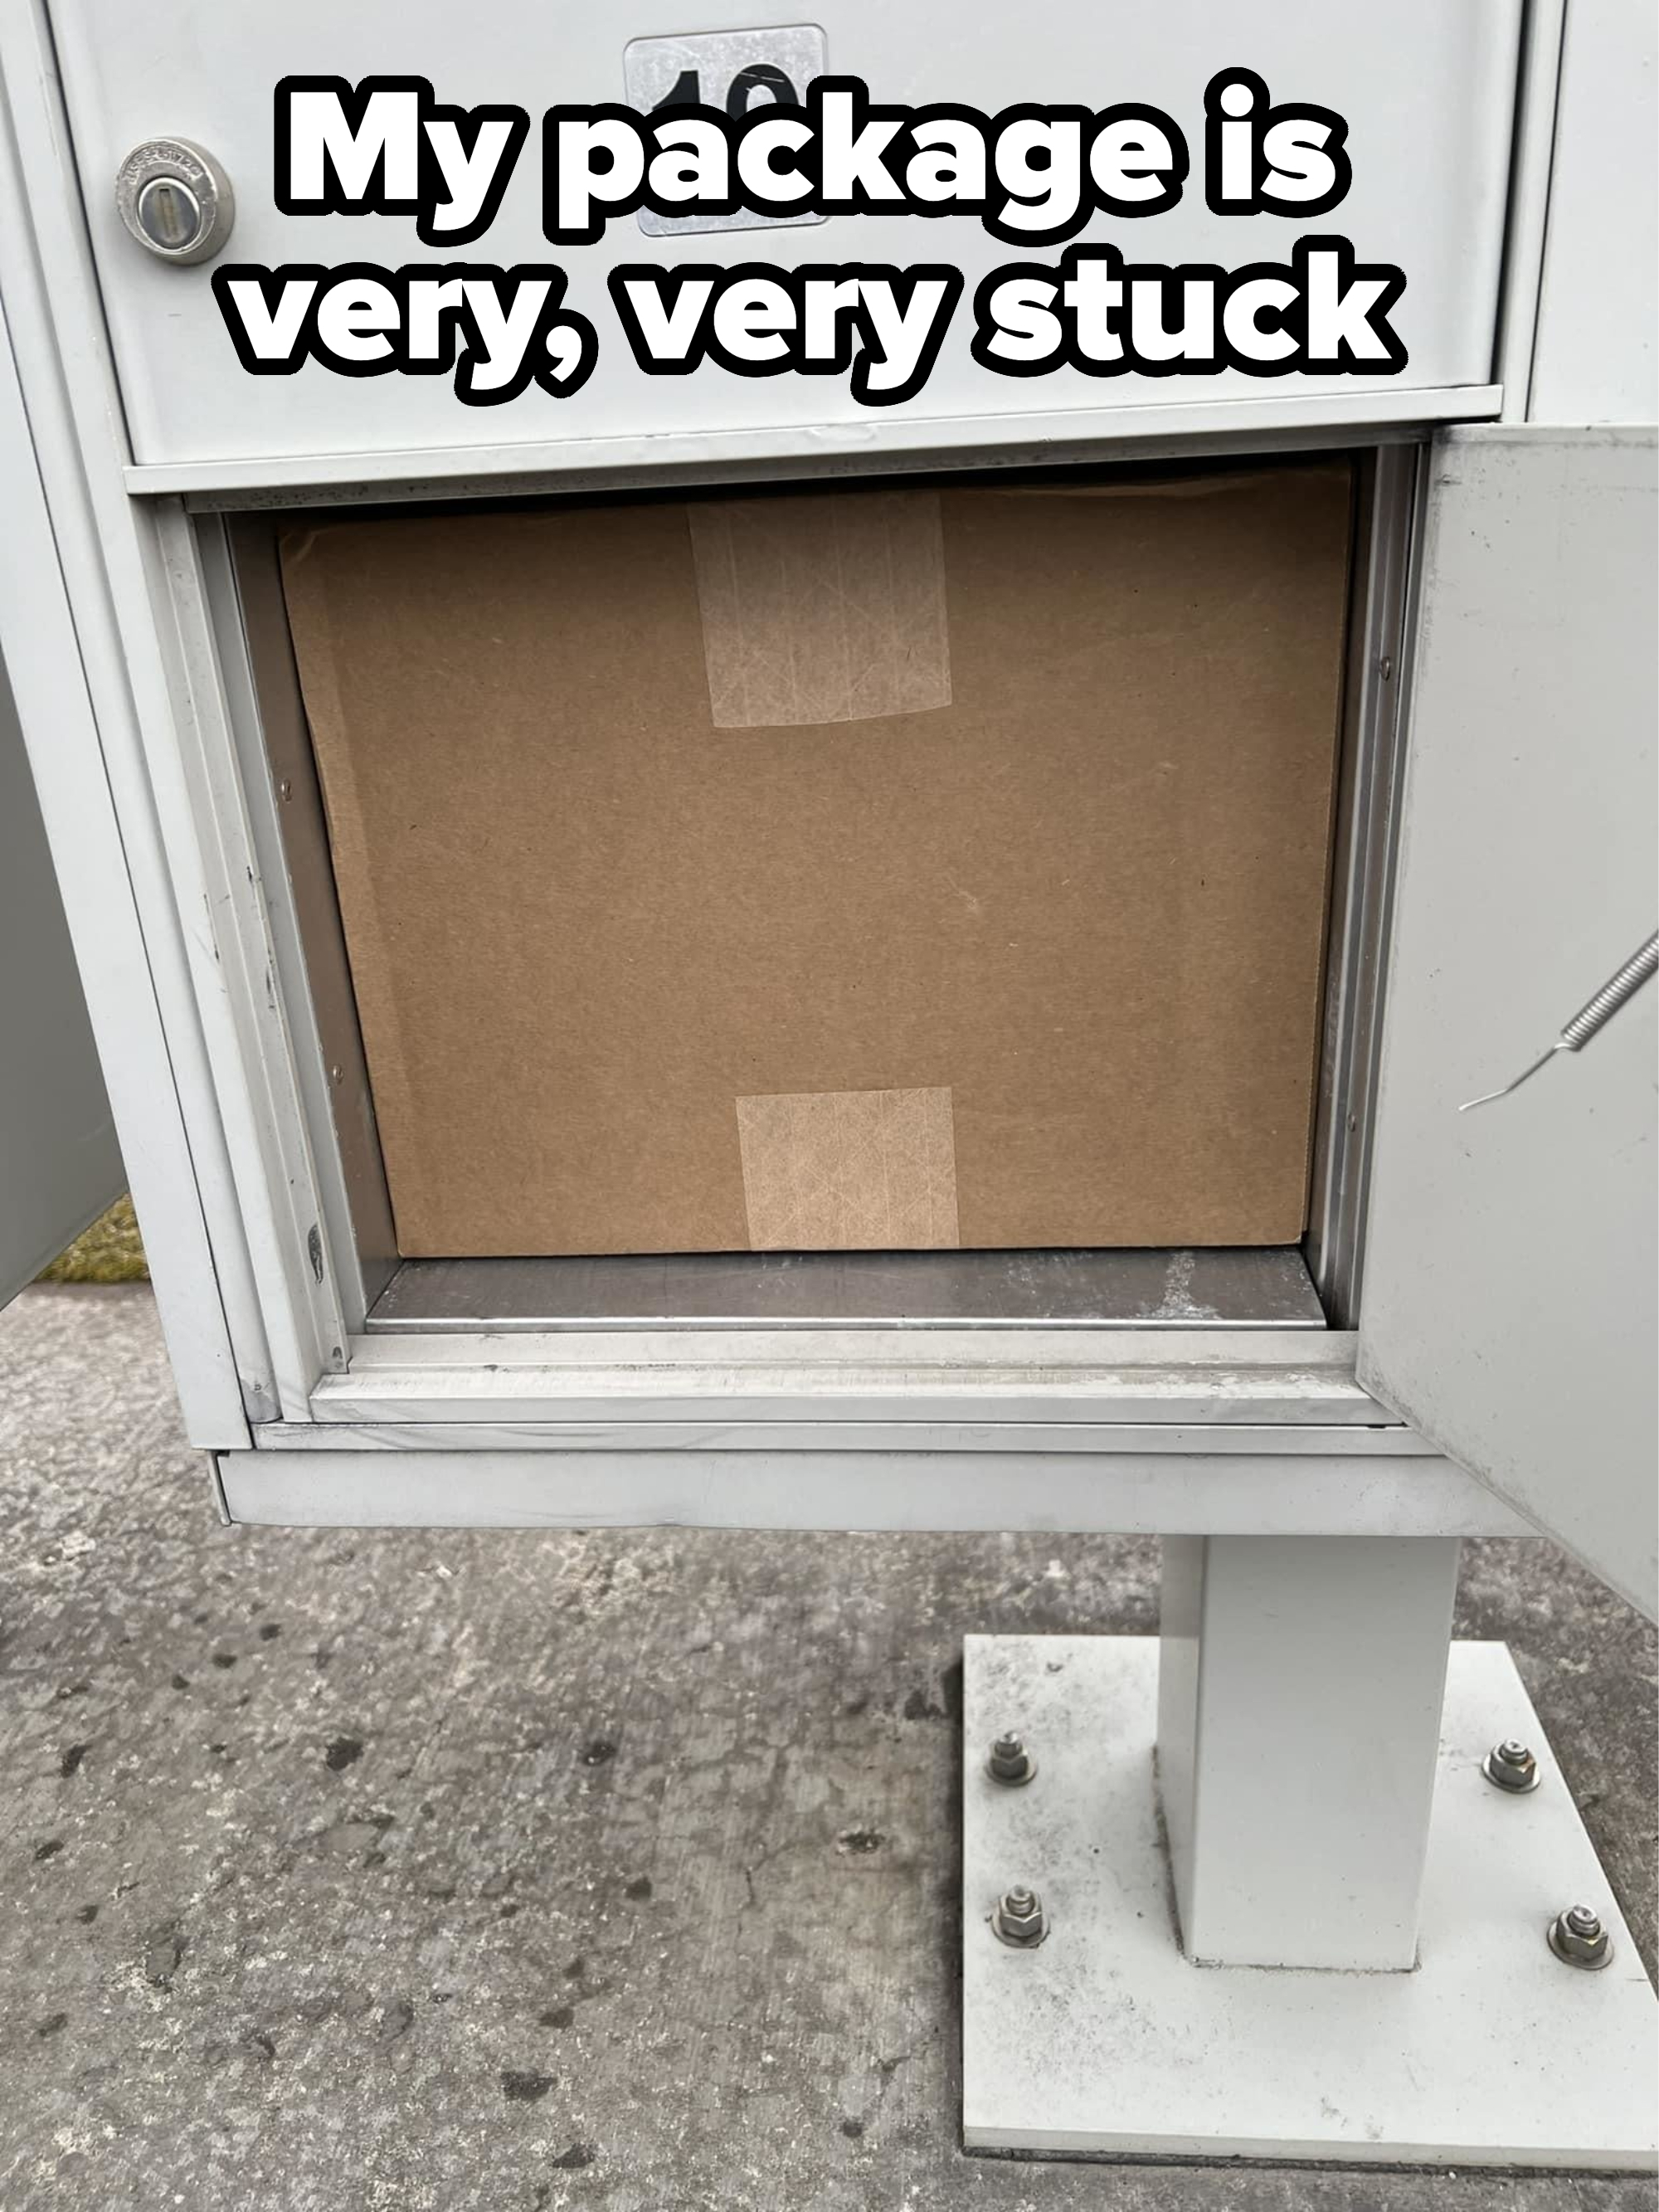 Box completely filling a mailbox slot, visible through an open door